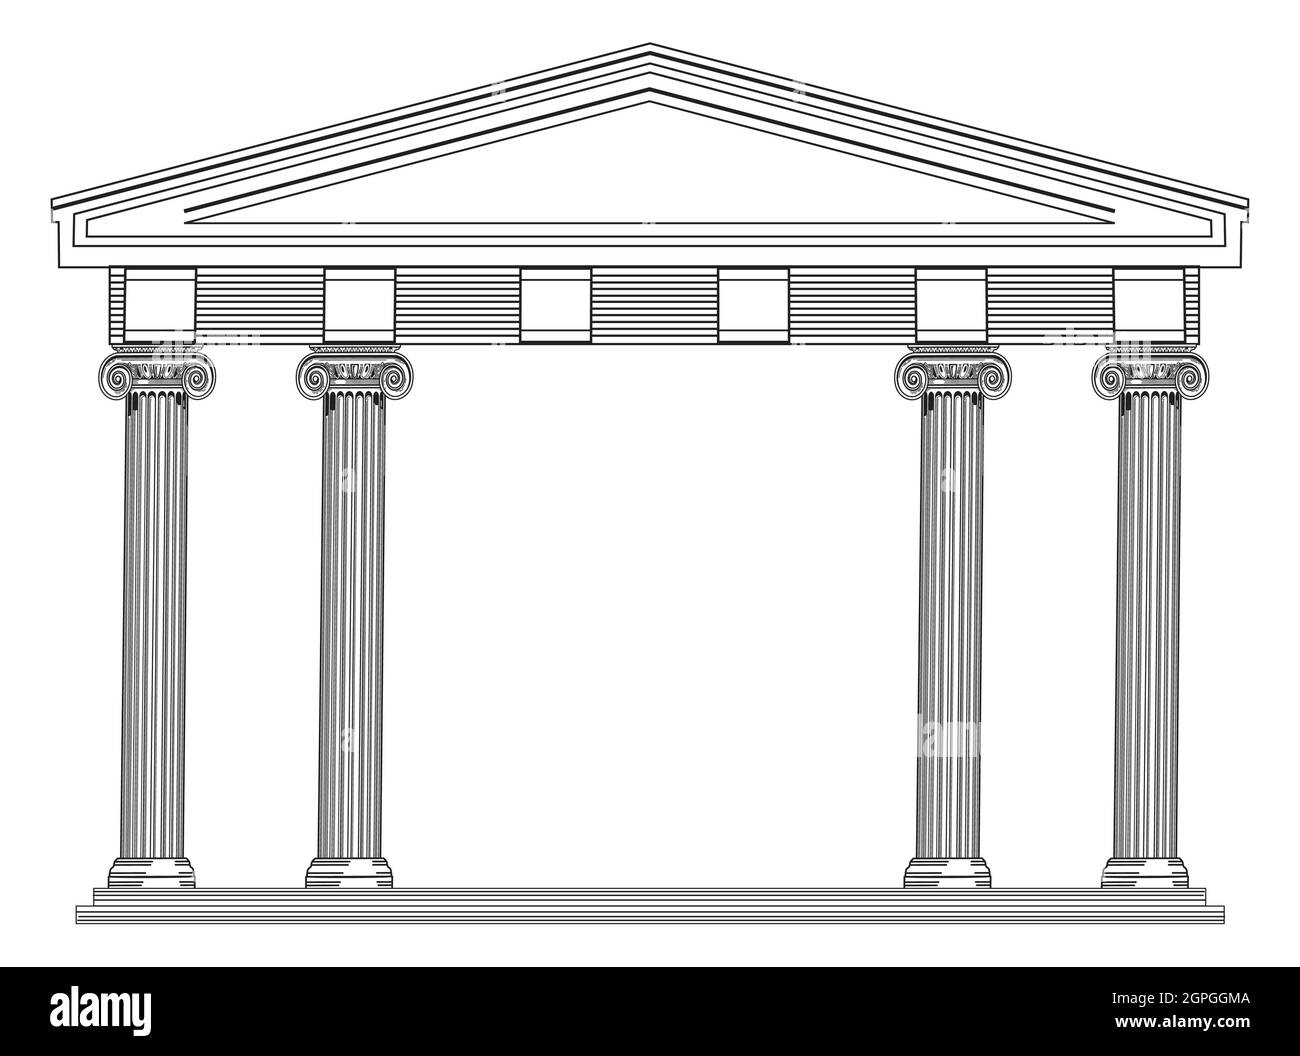 Greek And Roman Architecture Black And White Stock Photos And Images Alamy